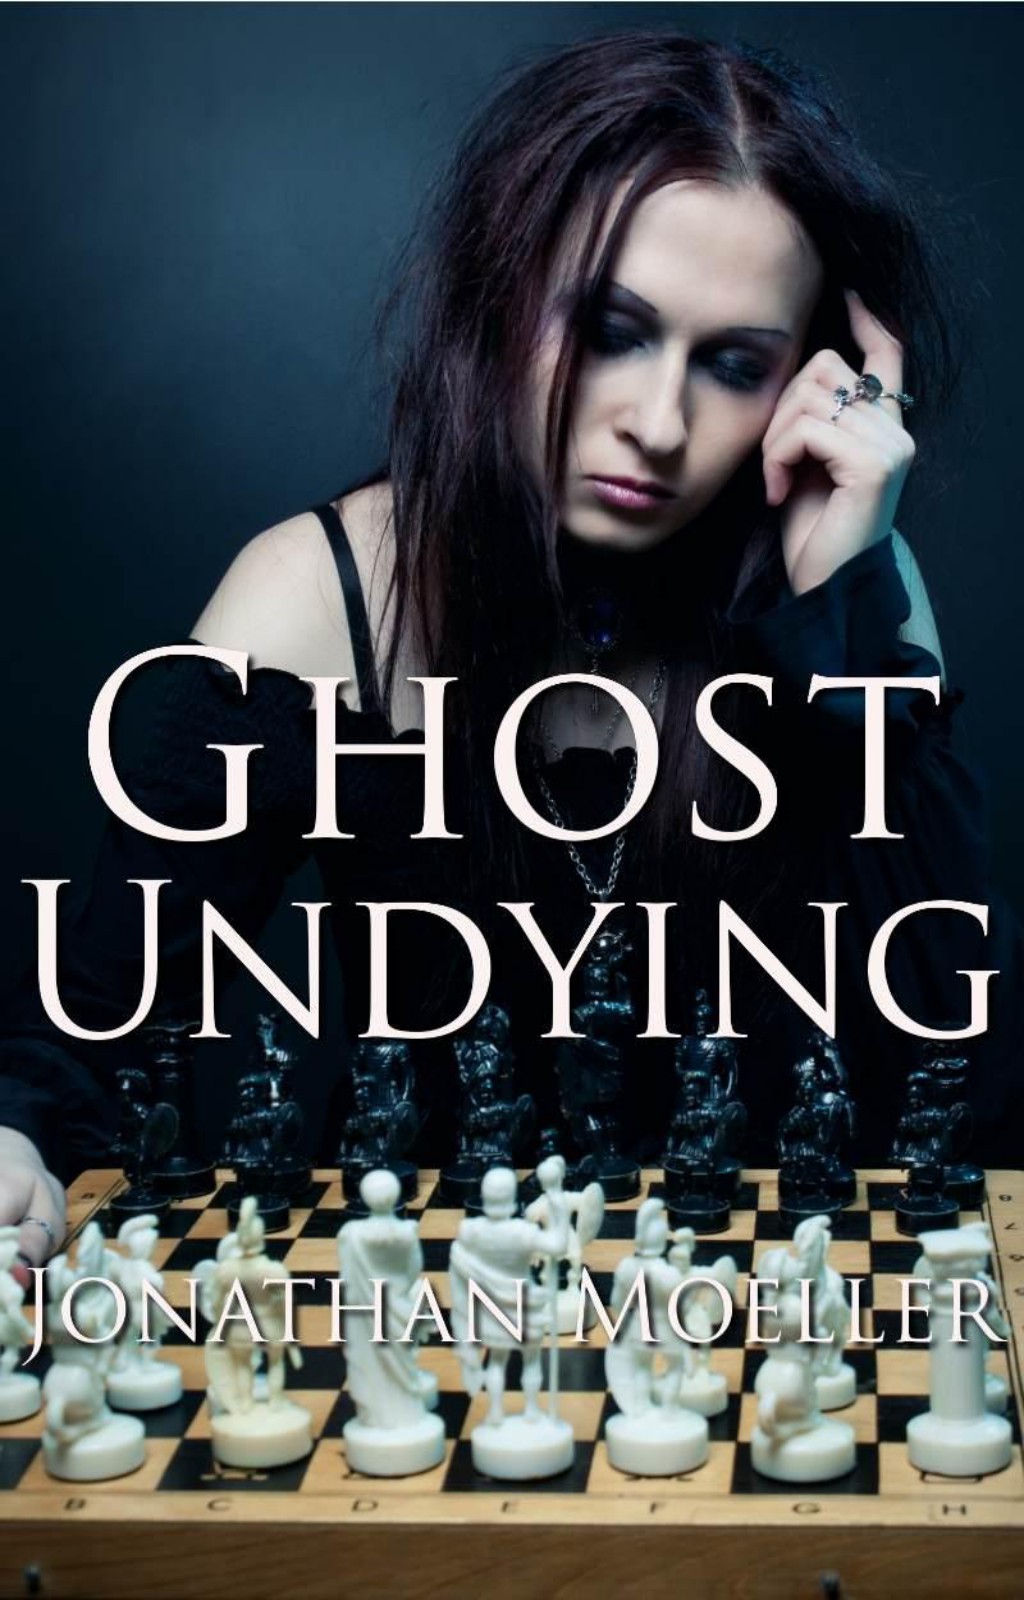 Ghost Undying by Jonathan Moeller